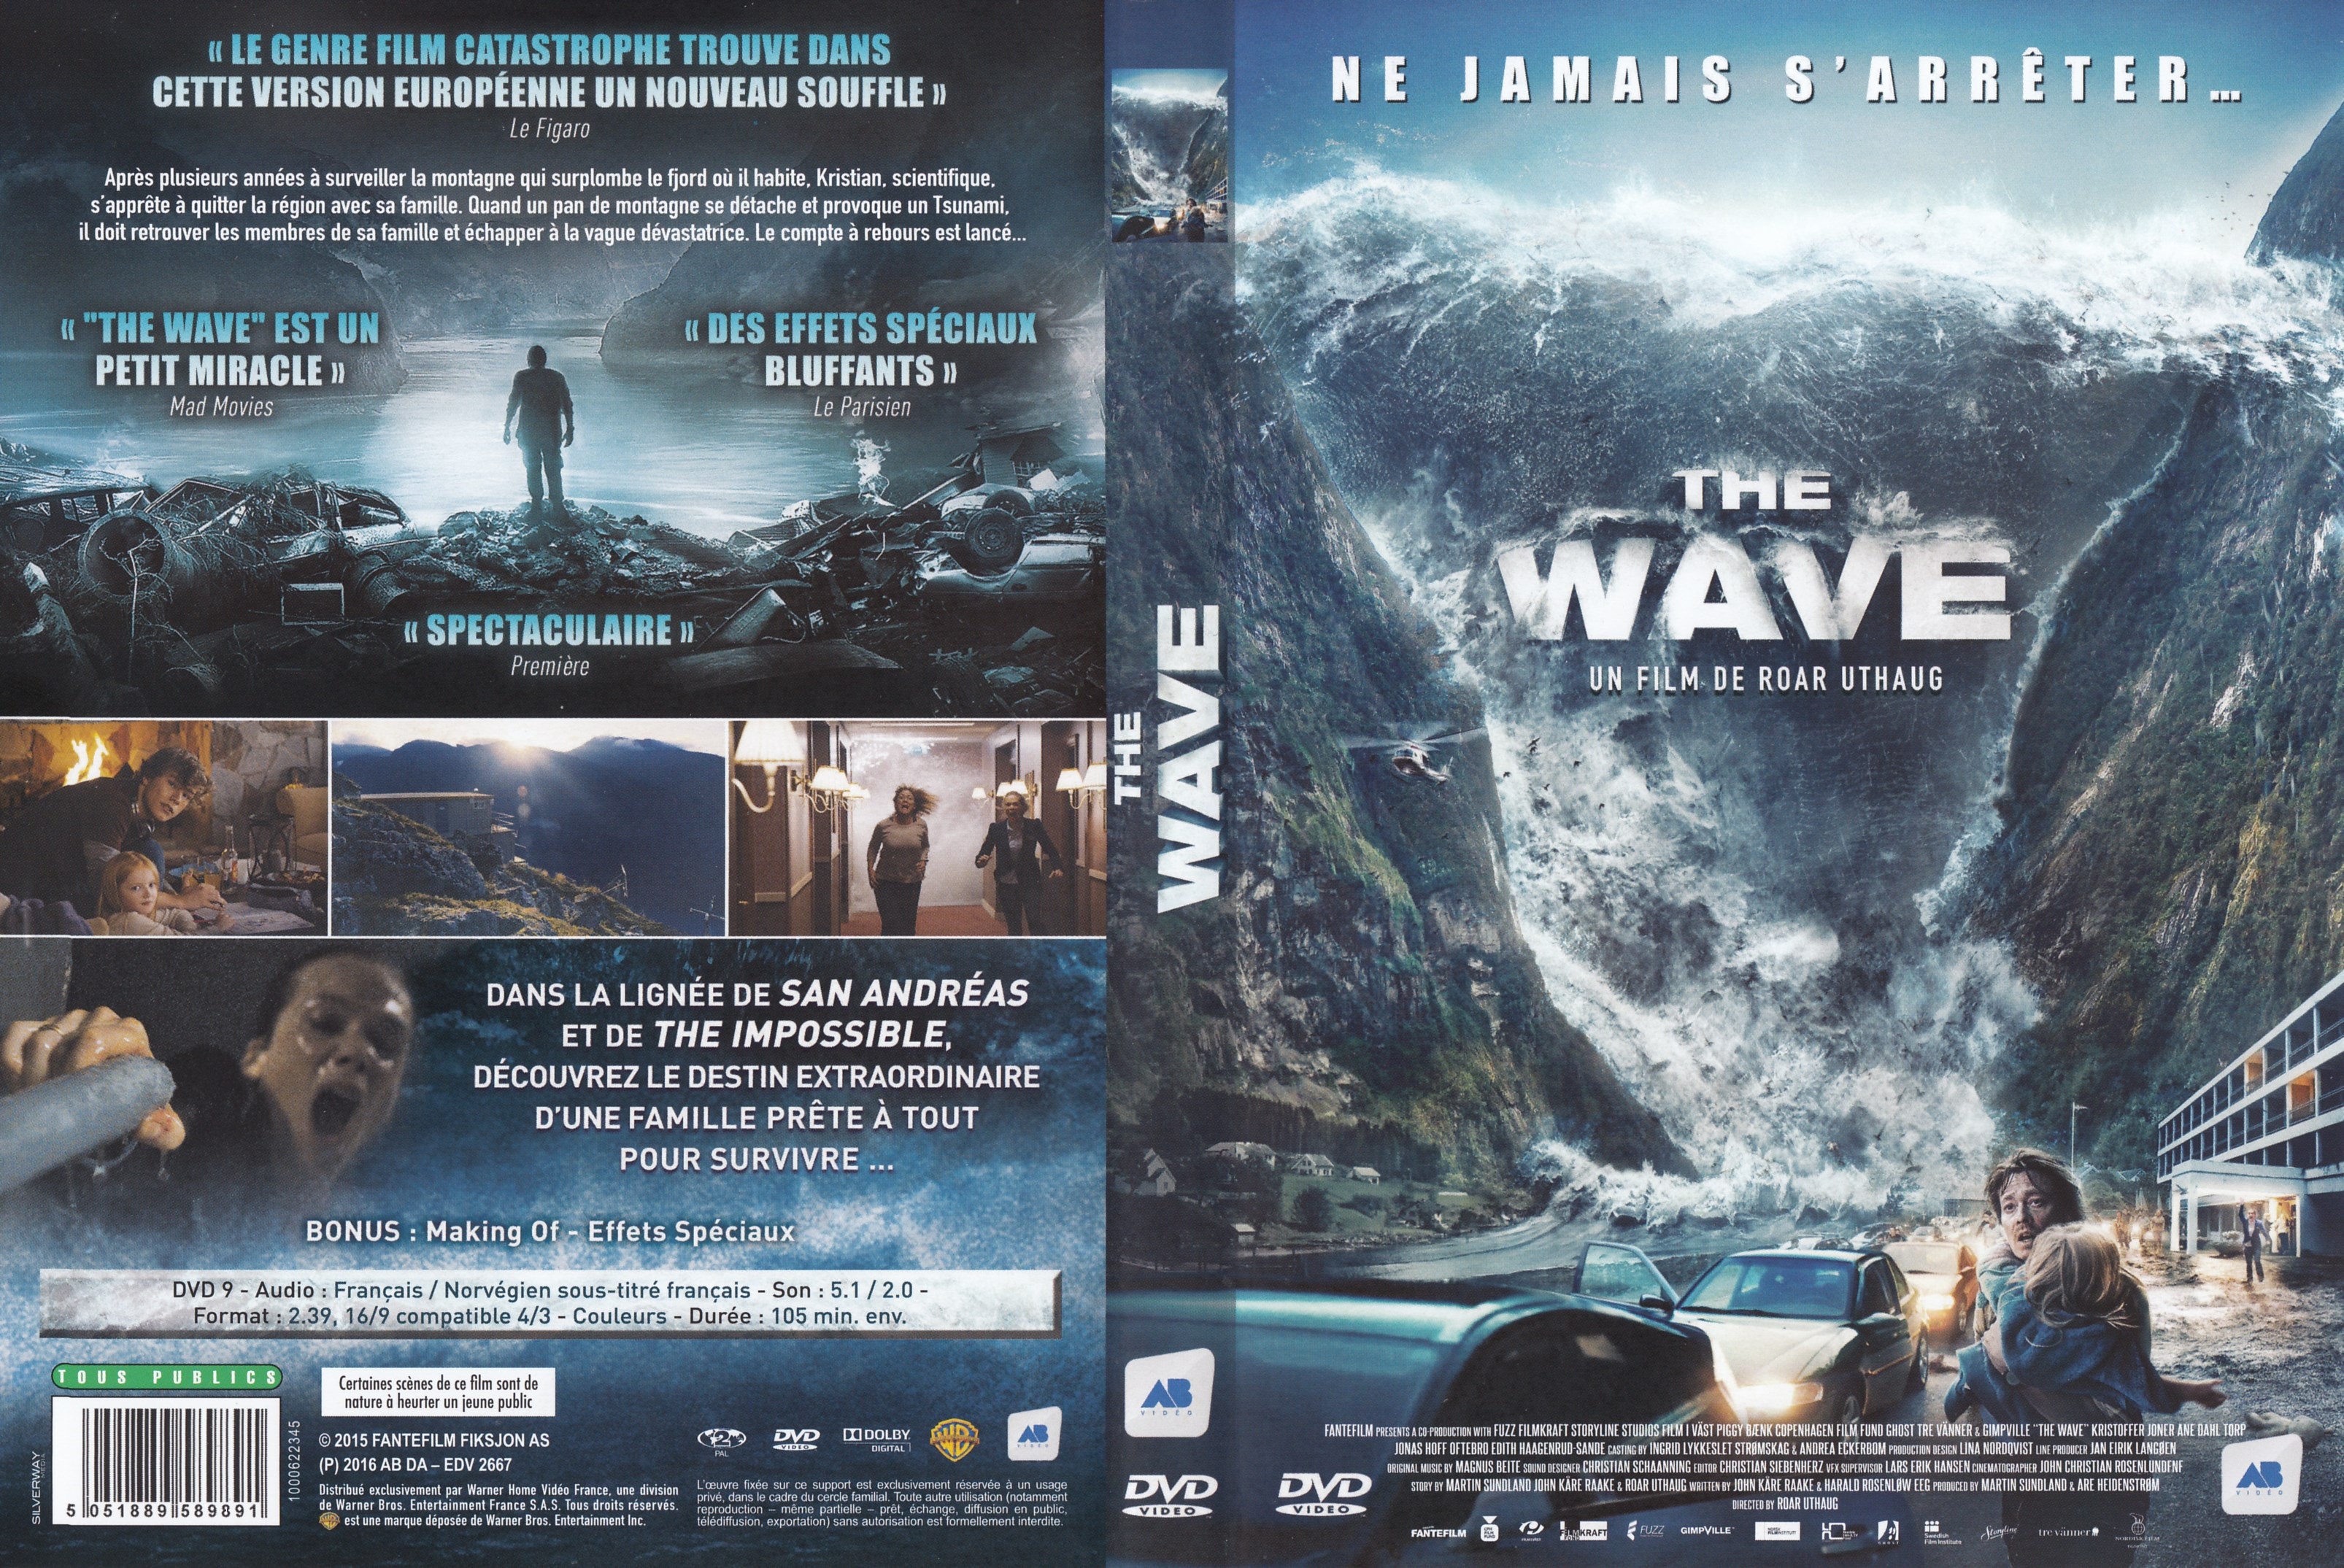 Jaquette DVD The Wave